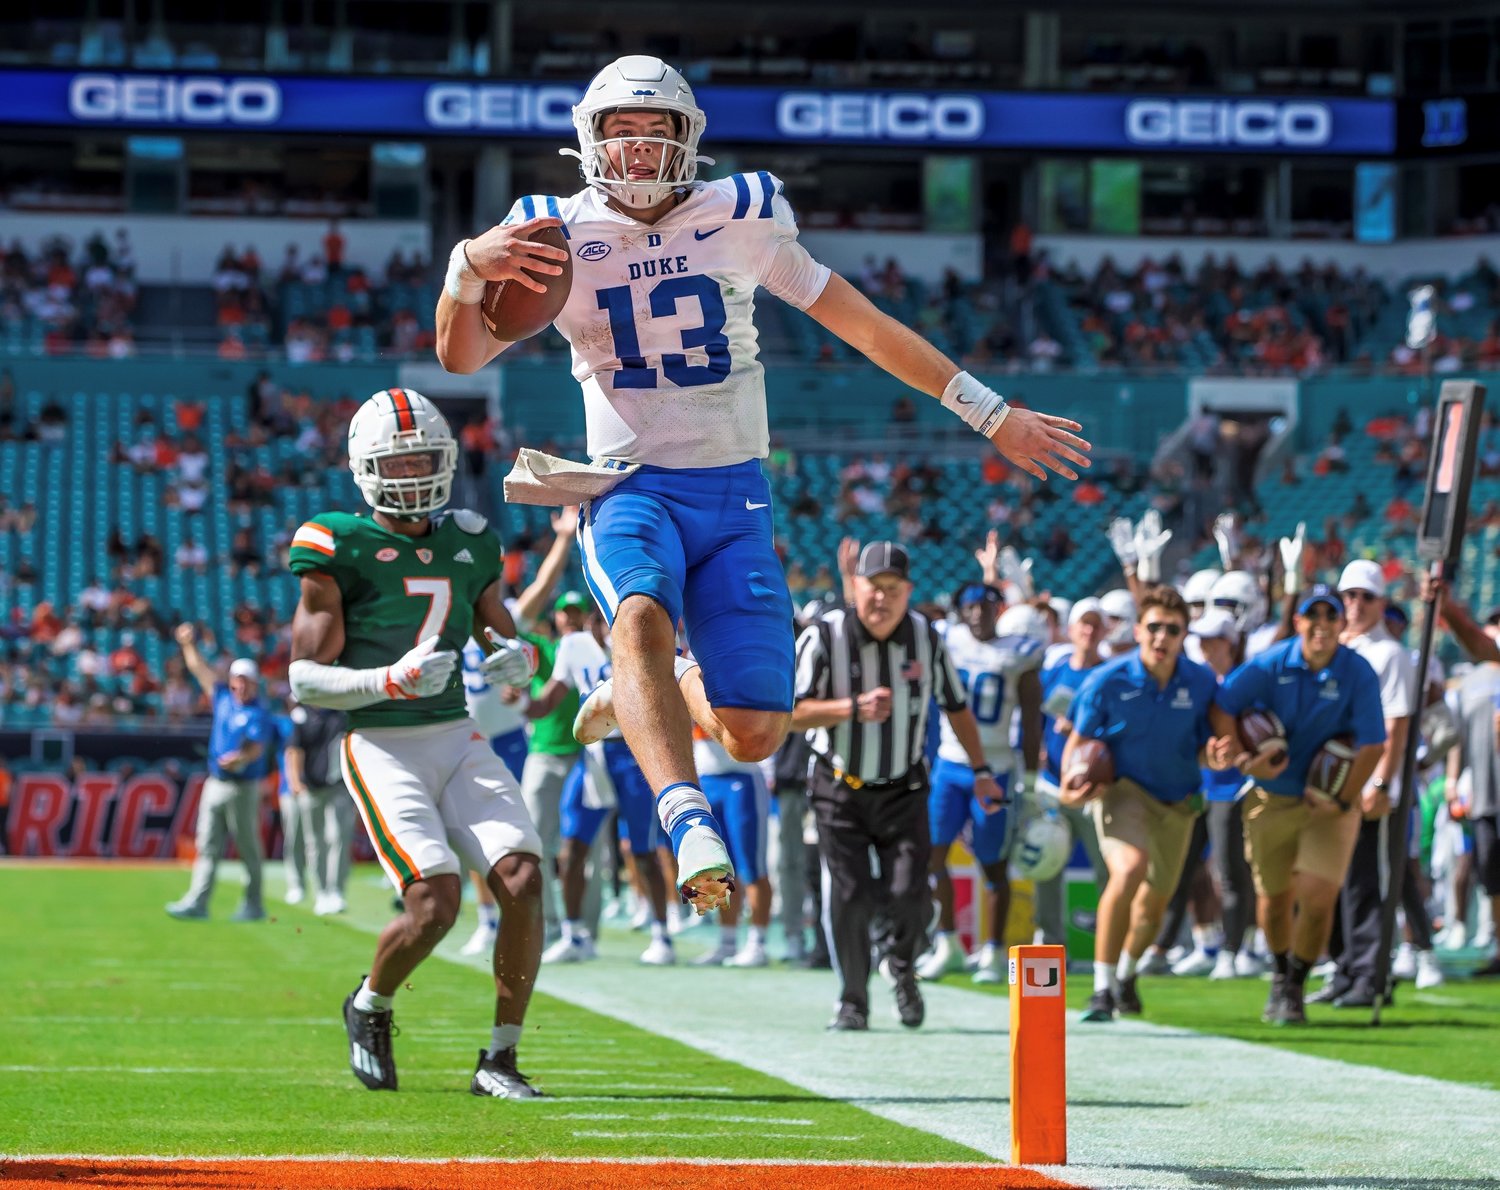 Duke sophomore quarterback Riley Leonard launches into the air as he crosses the goal line on his way to scoring his third rushing touchdown during the Blue Devils’ ACC matchup against the Miami Hurricanes Saturday at Hard Rock Stadium. The former Fairhope Pirate has been leading a resurgence of confidence and swagger in the Duke program.